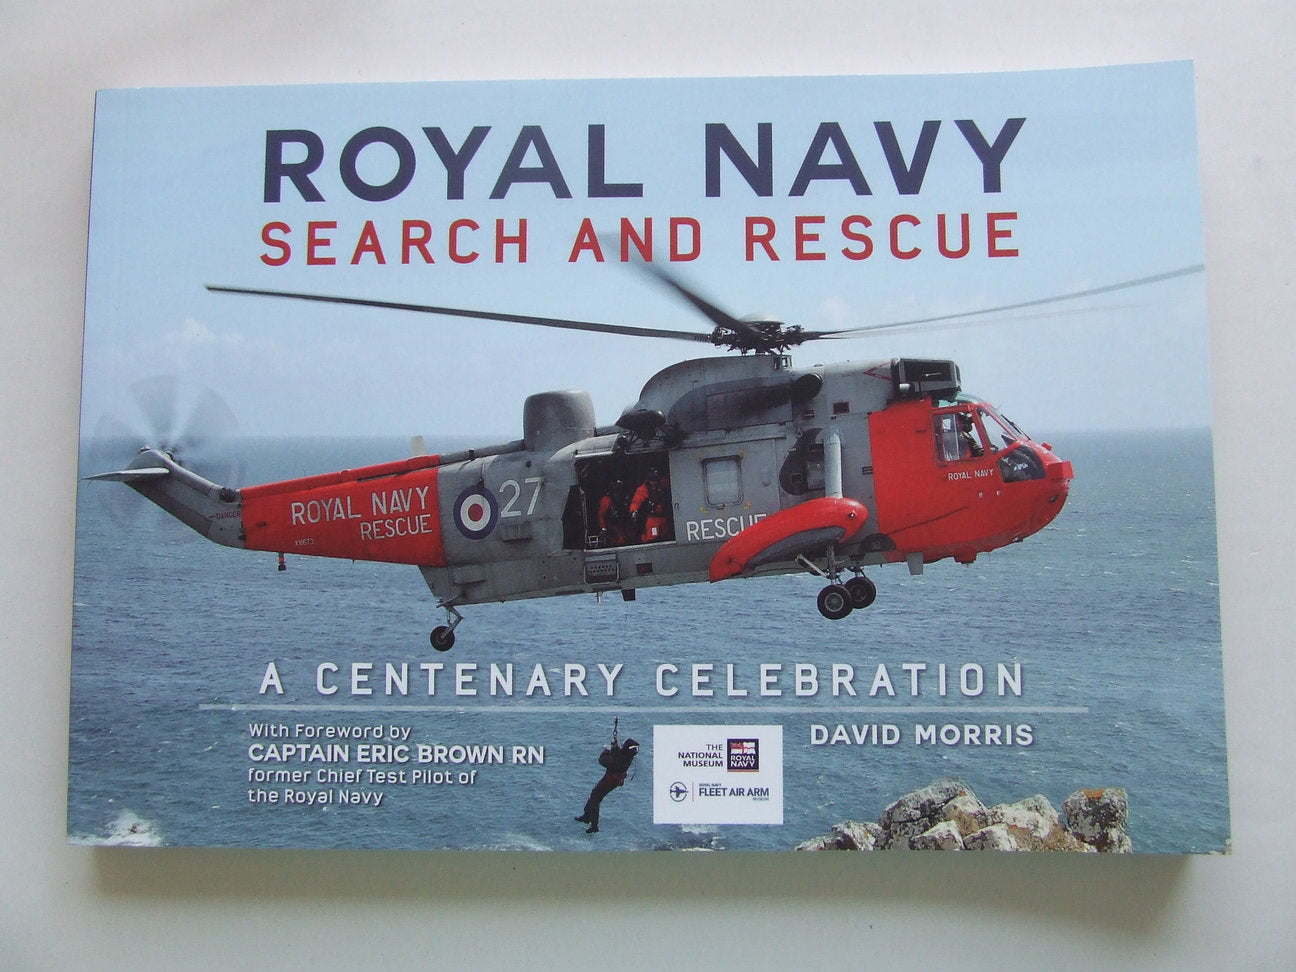 Royal Navy Search and Rescue, a centenary celebration